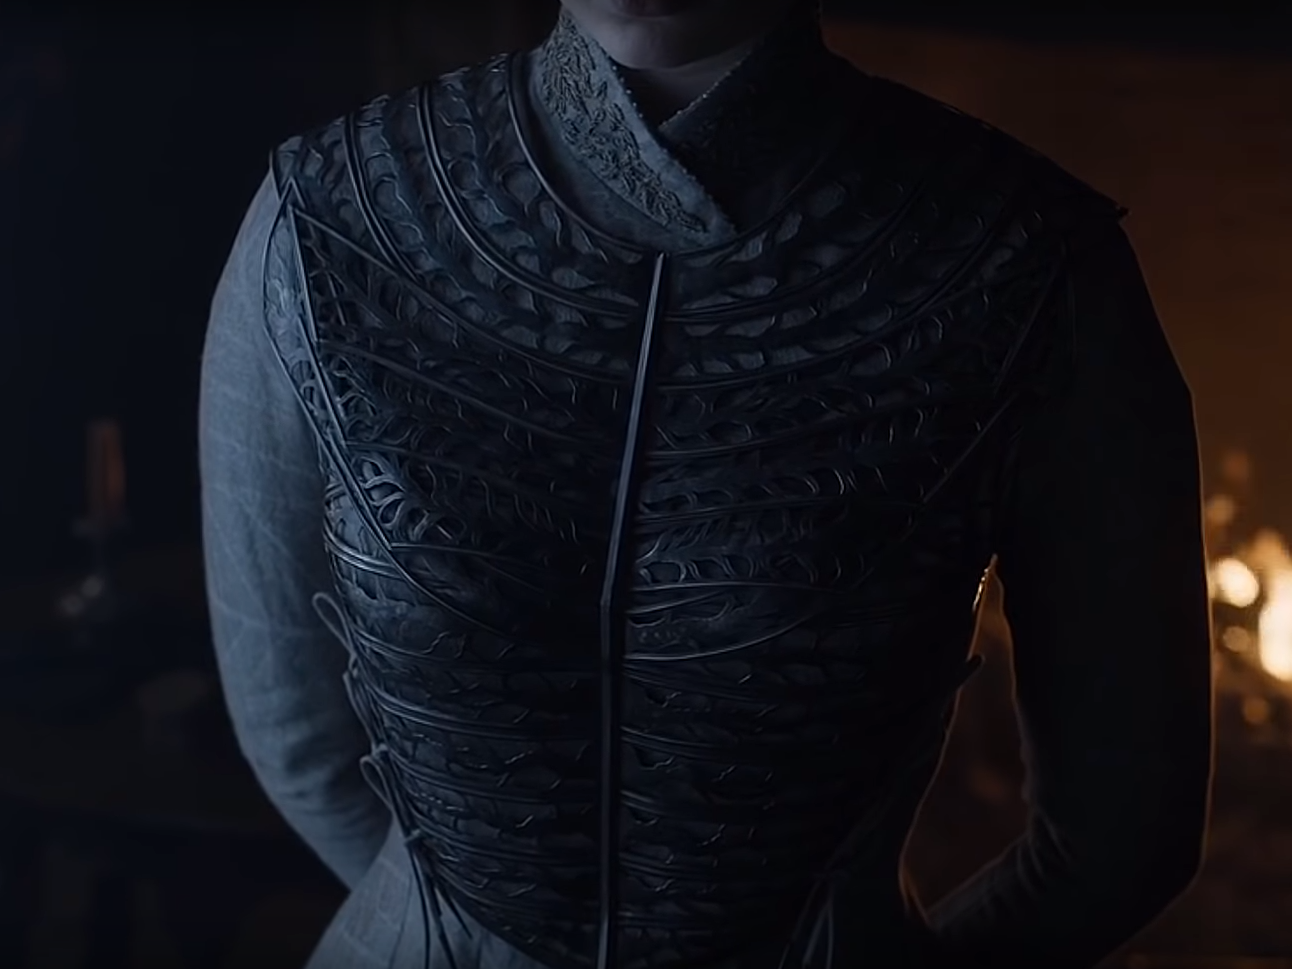 Sansa's breast plate features a tree branch design, which could symbolise the Weirwood tree in Winterfell